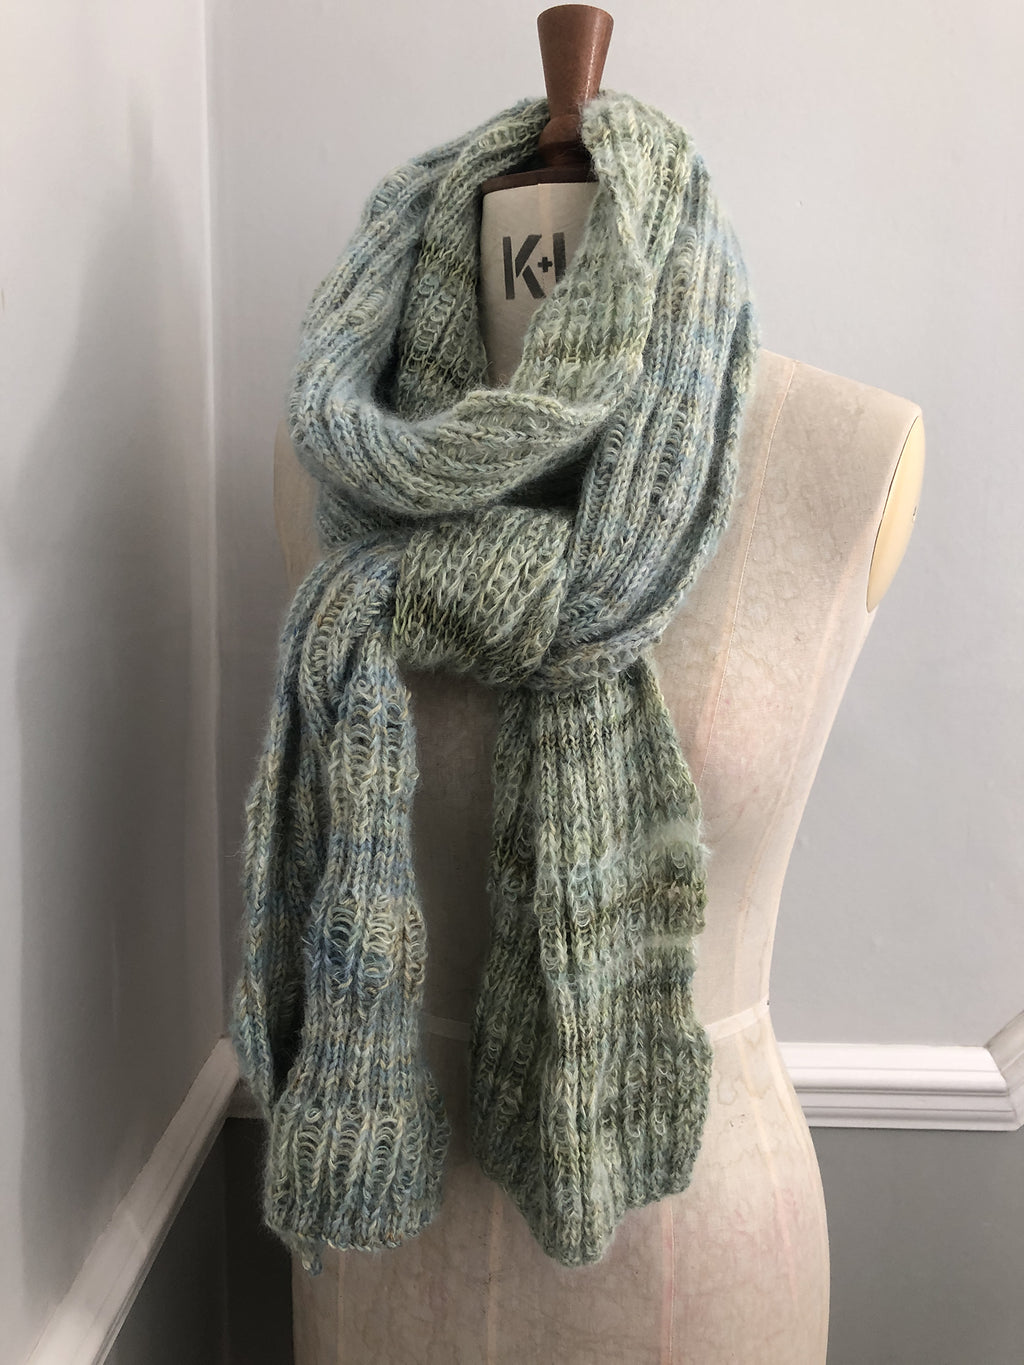 Soft hand-dyed wool and baby silk alpaca in soft tones of greens and soft blues